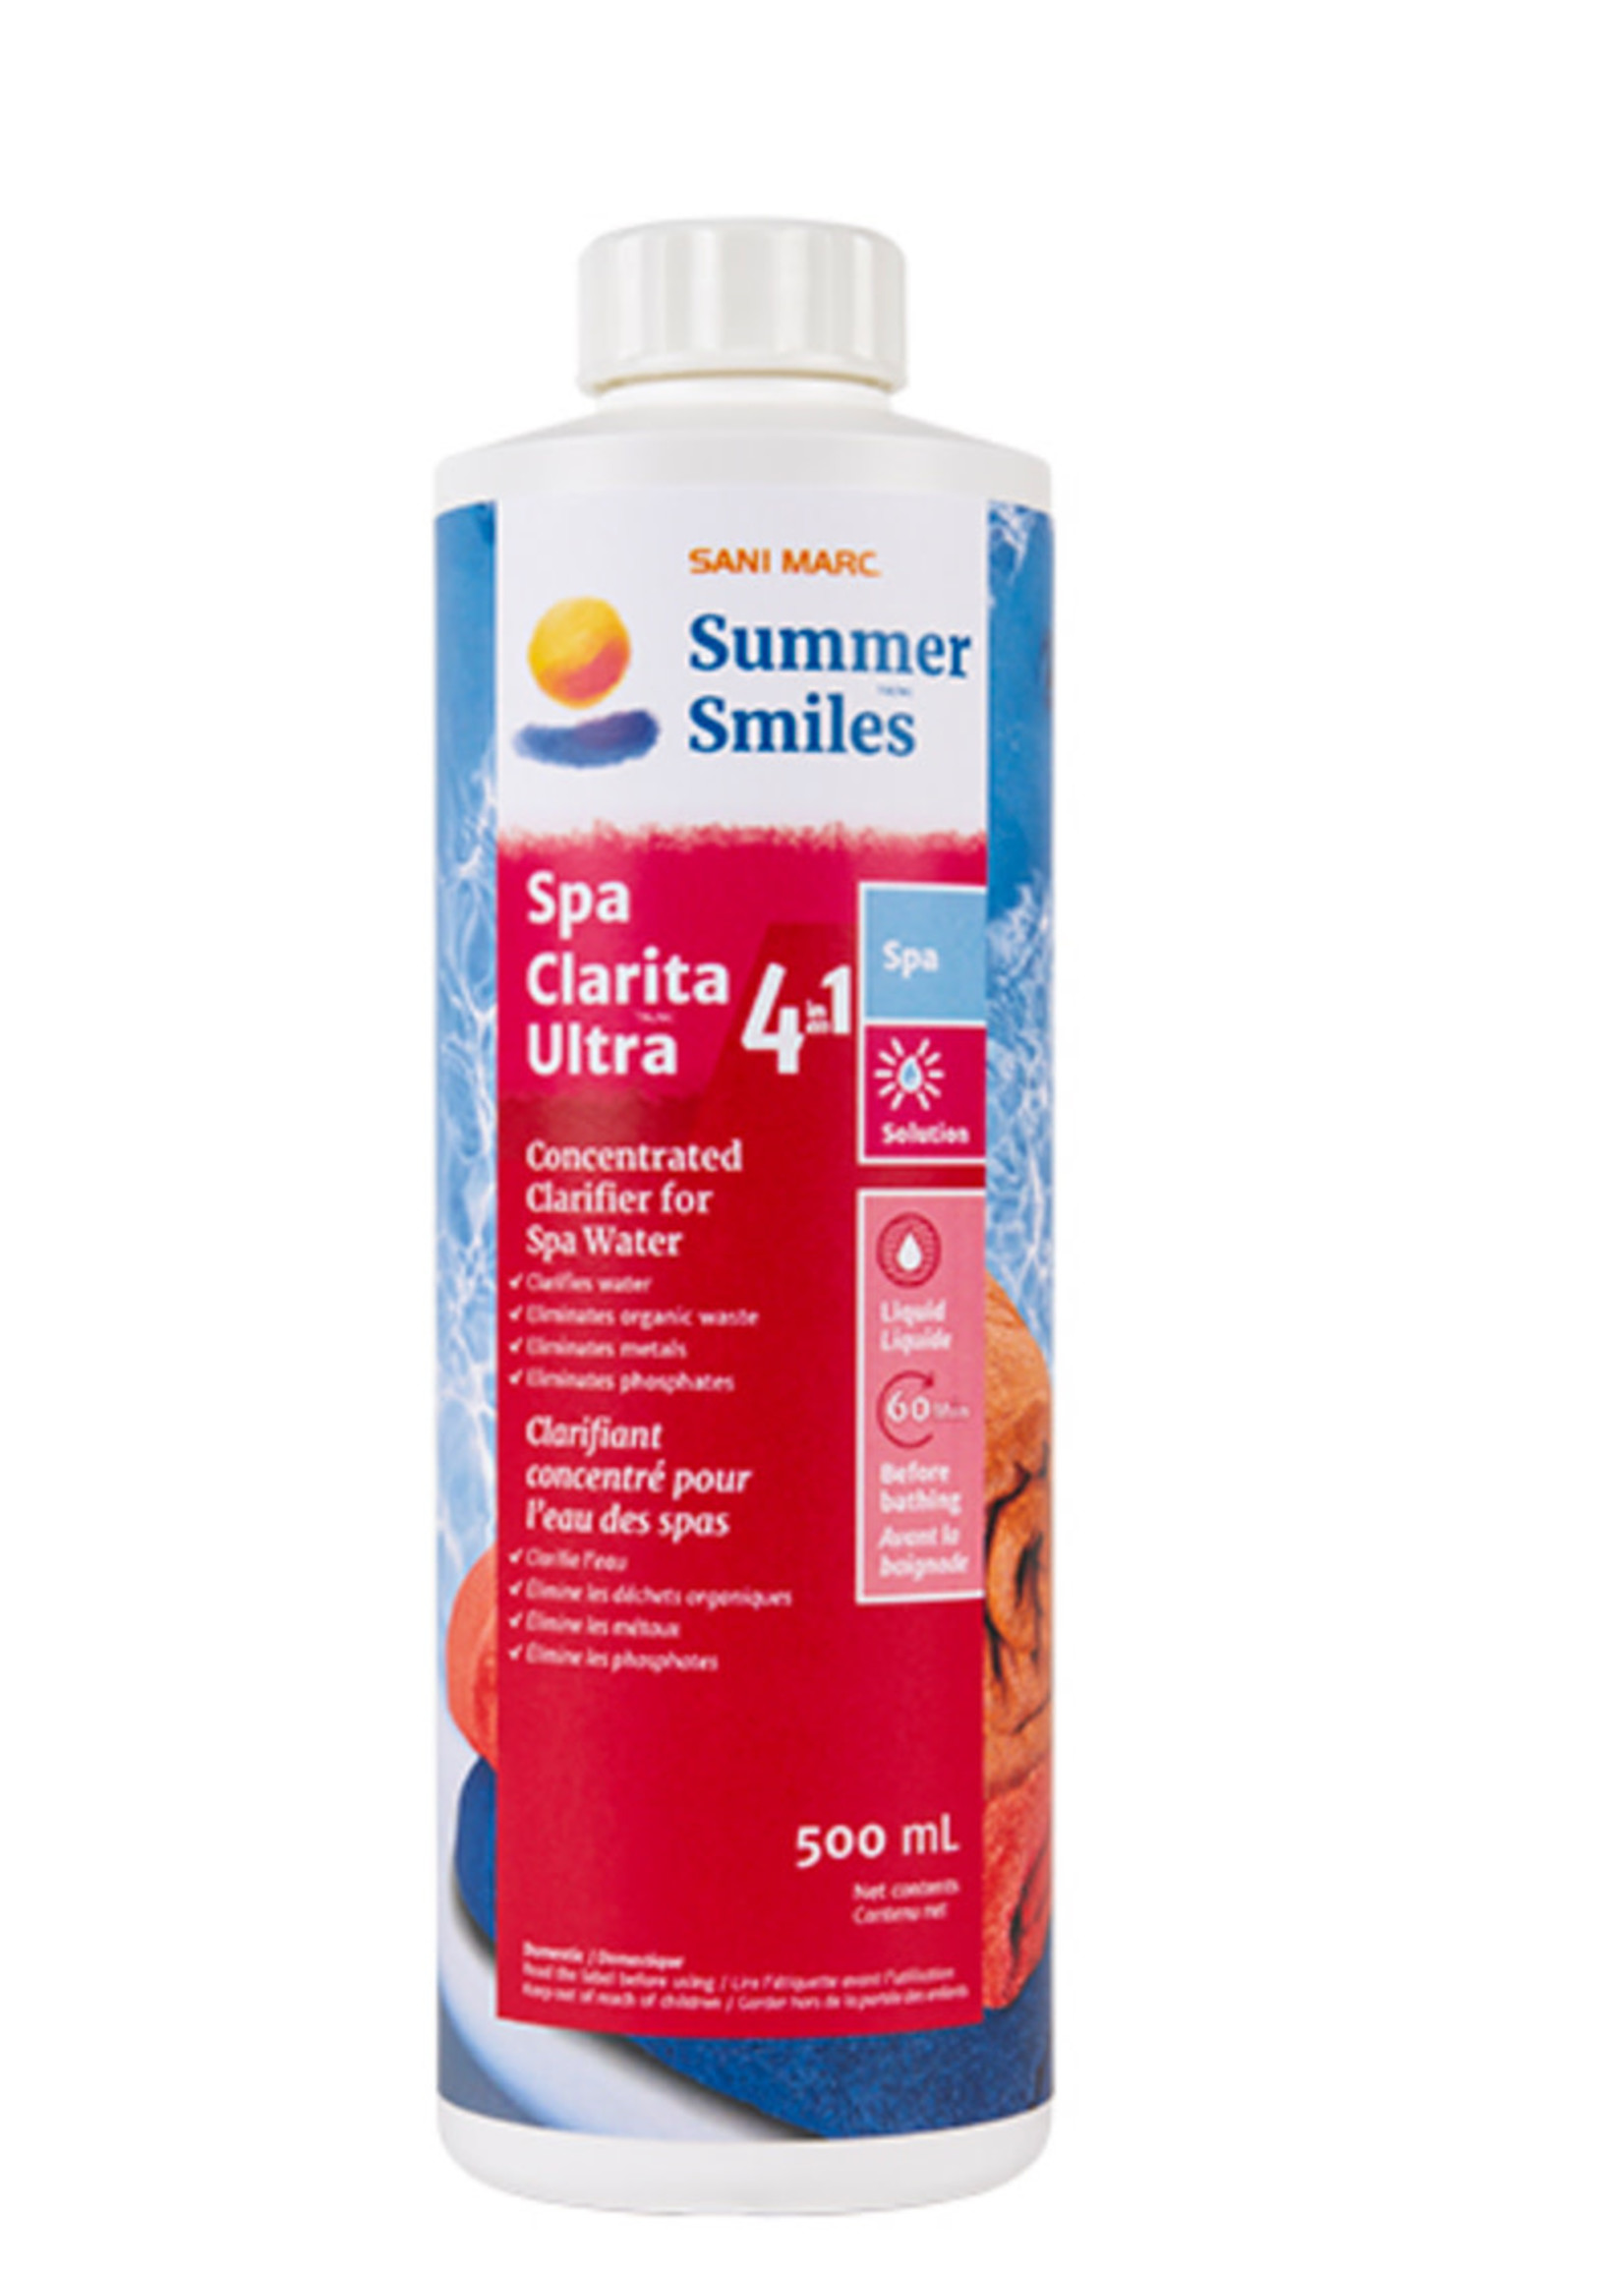 Sani Marc Summer Smiles Spa All OutUltra 4-in-1  500ml